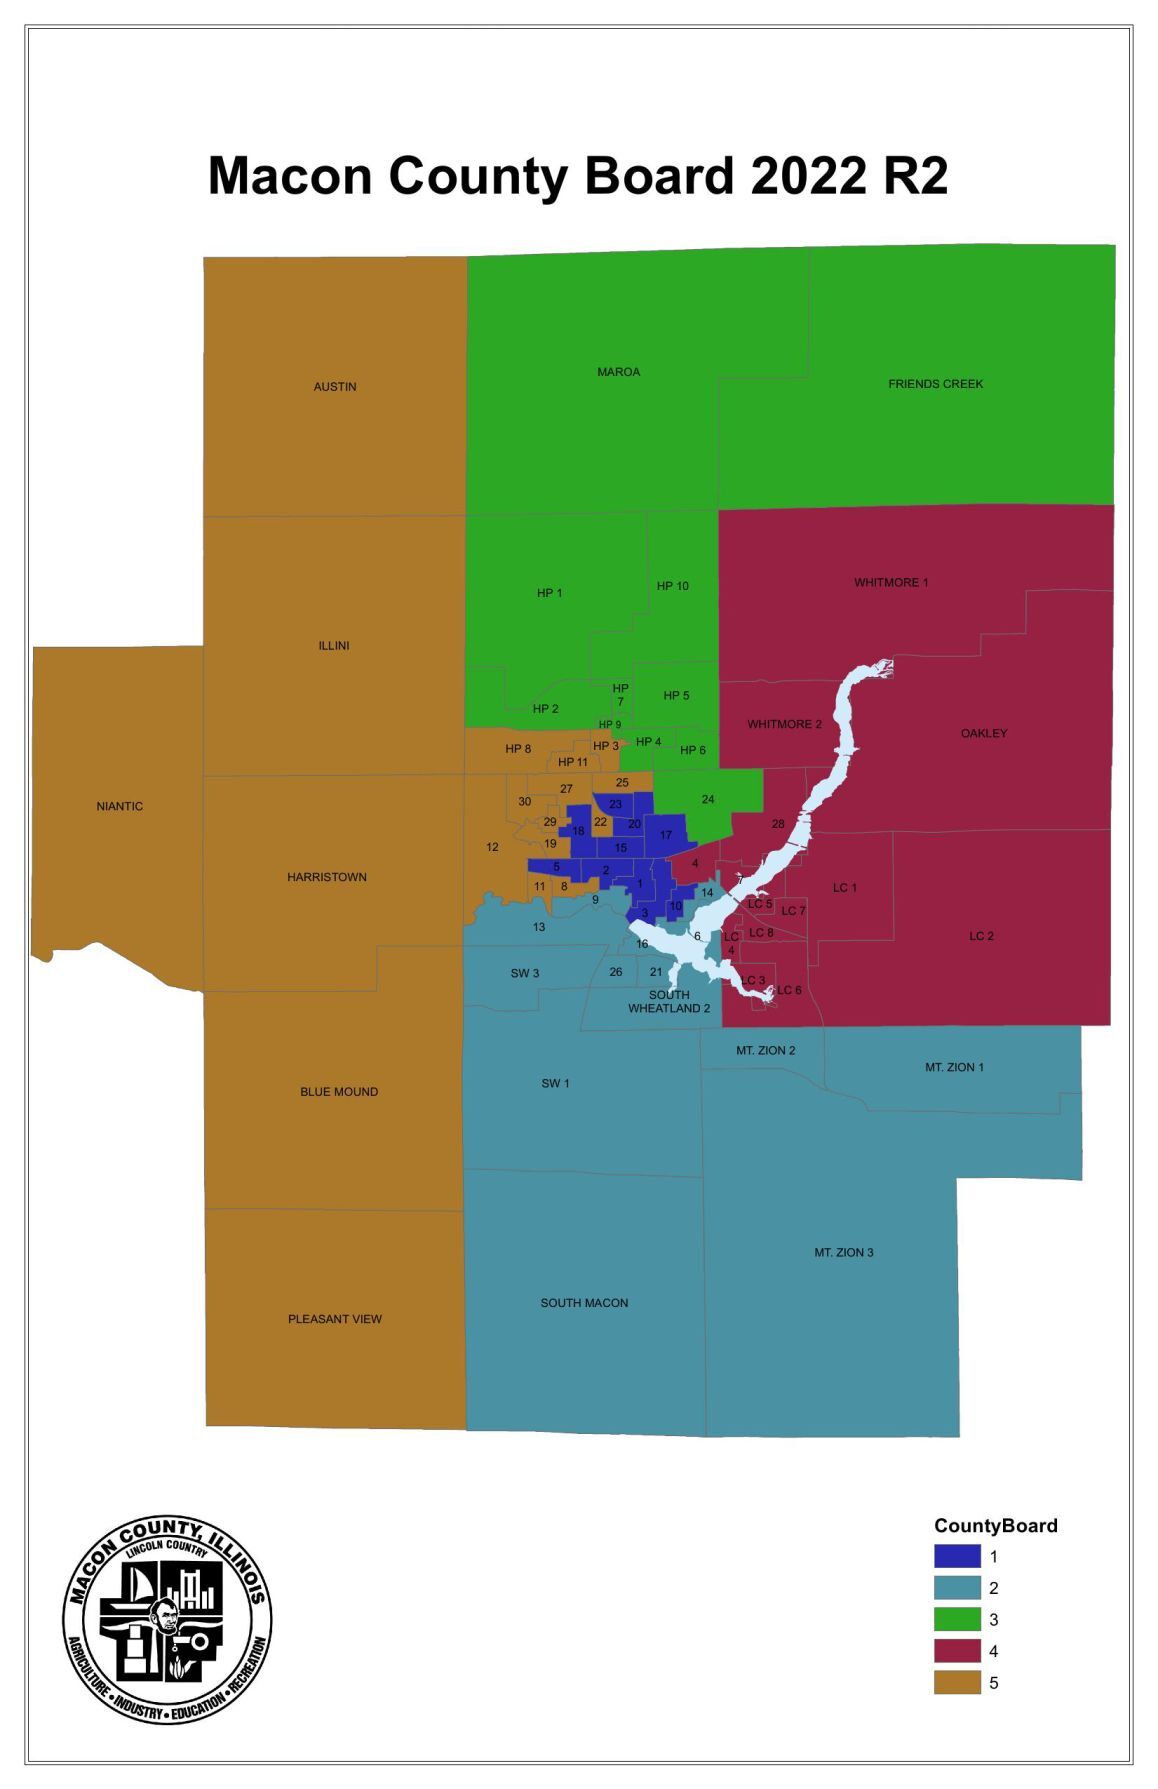 Macon County Voting District Map for the 2020 decade.